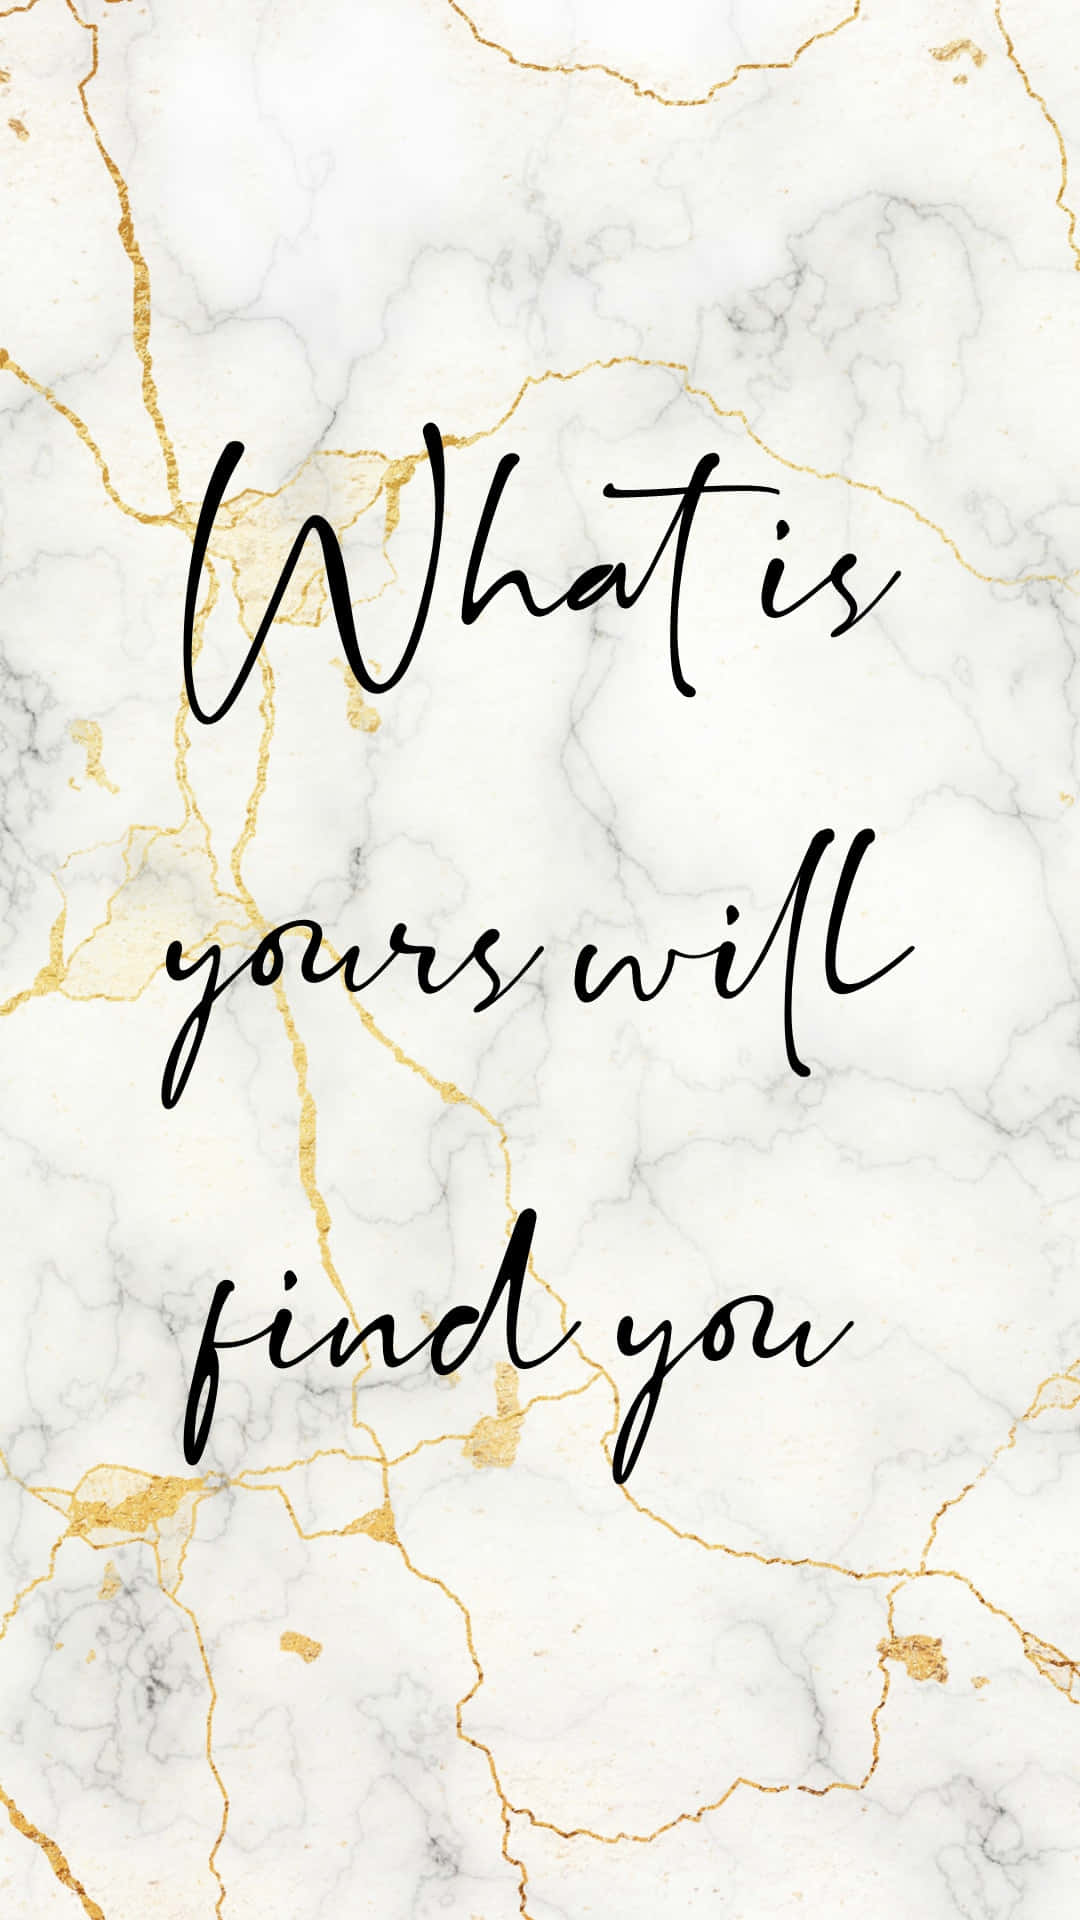 What Is Years Will Find You? Wallpaper